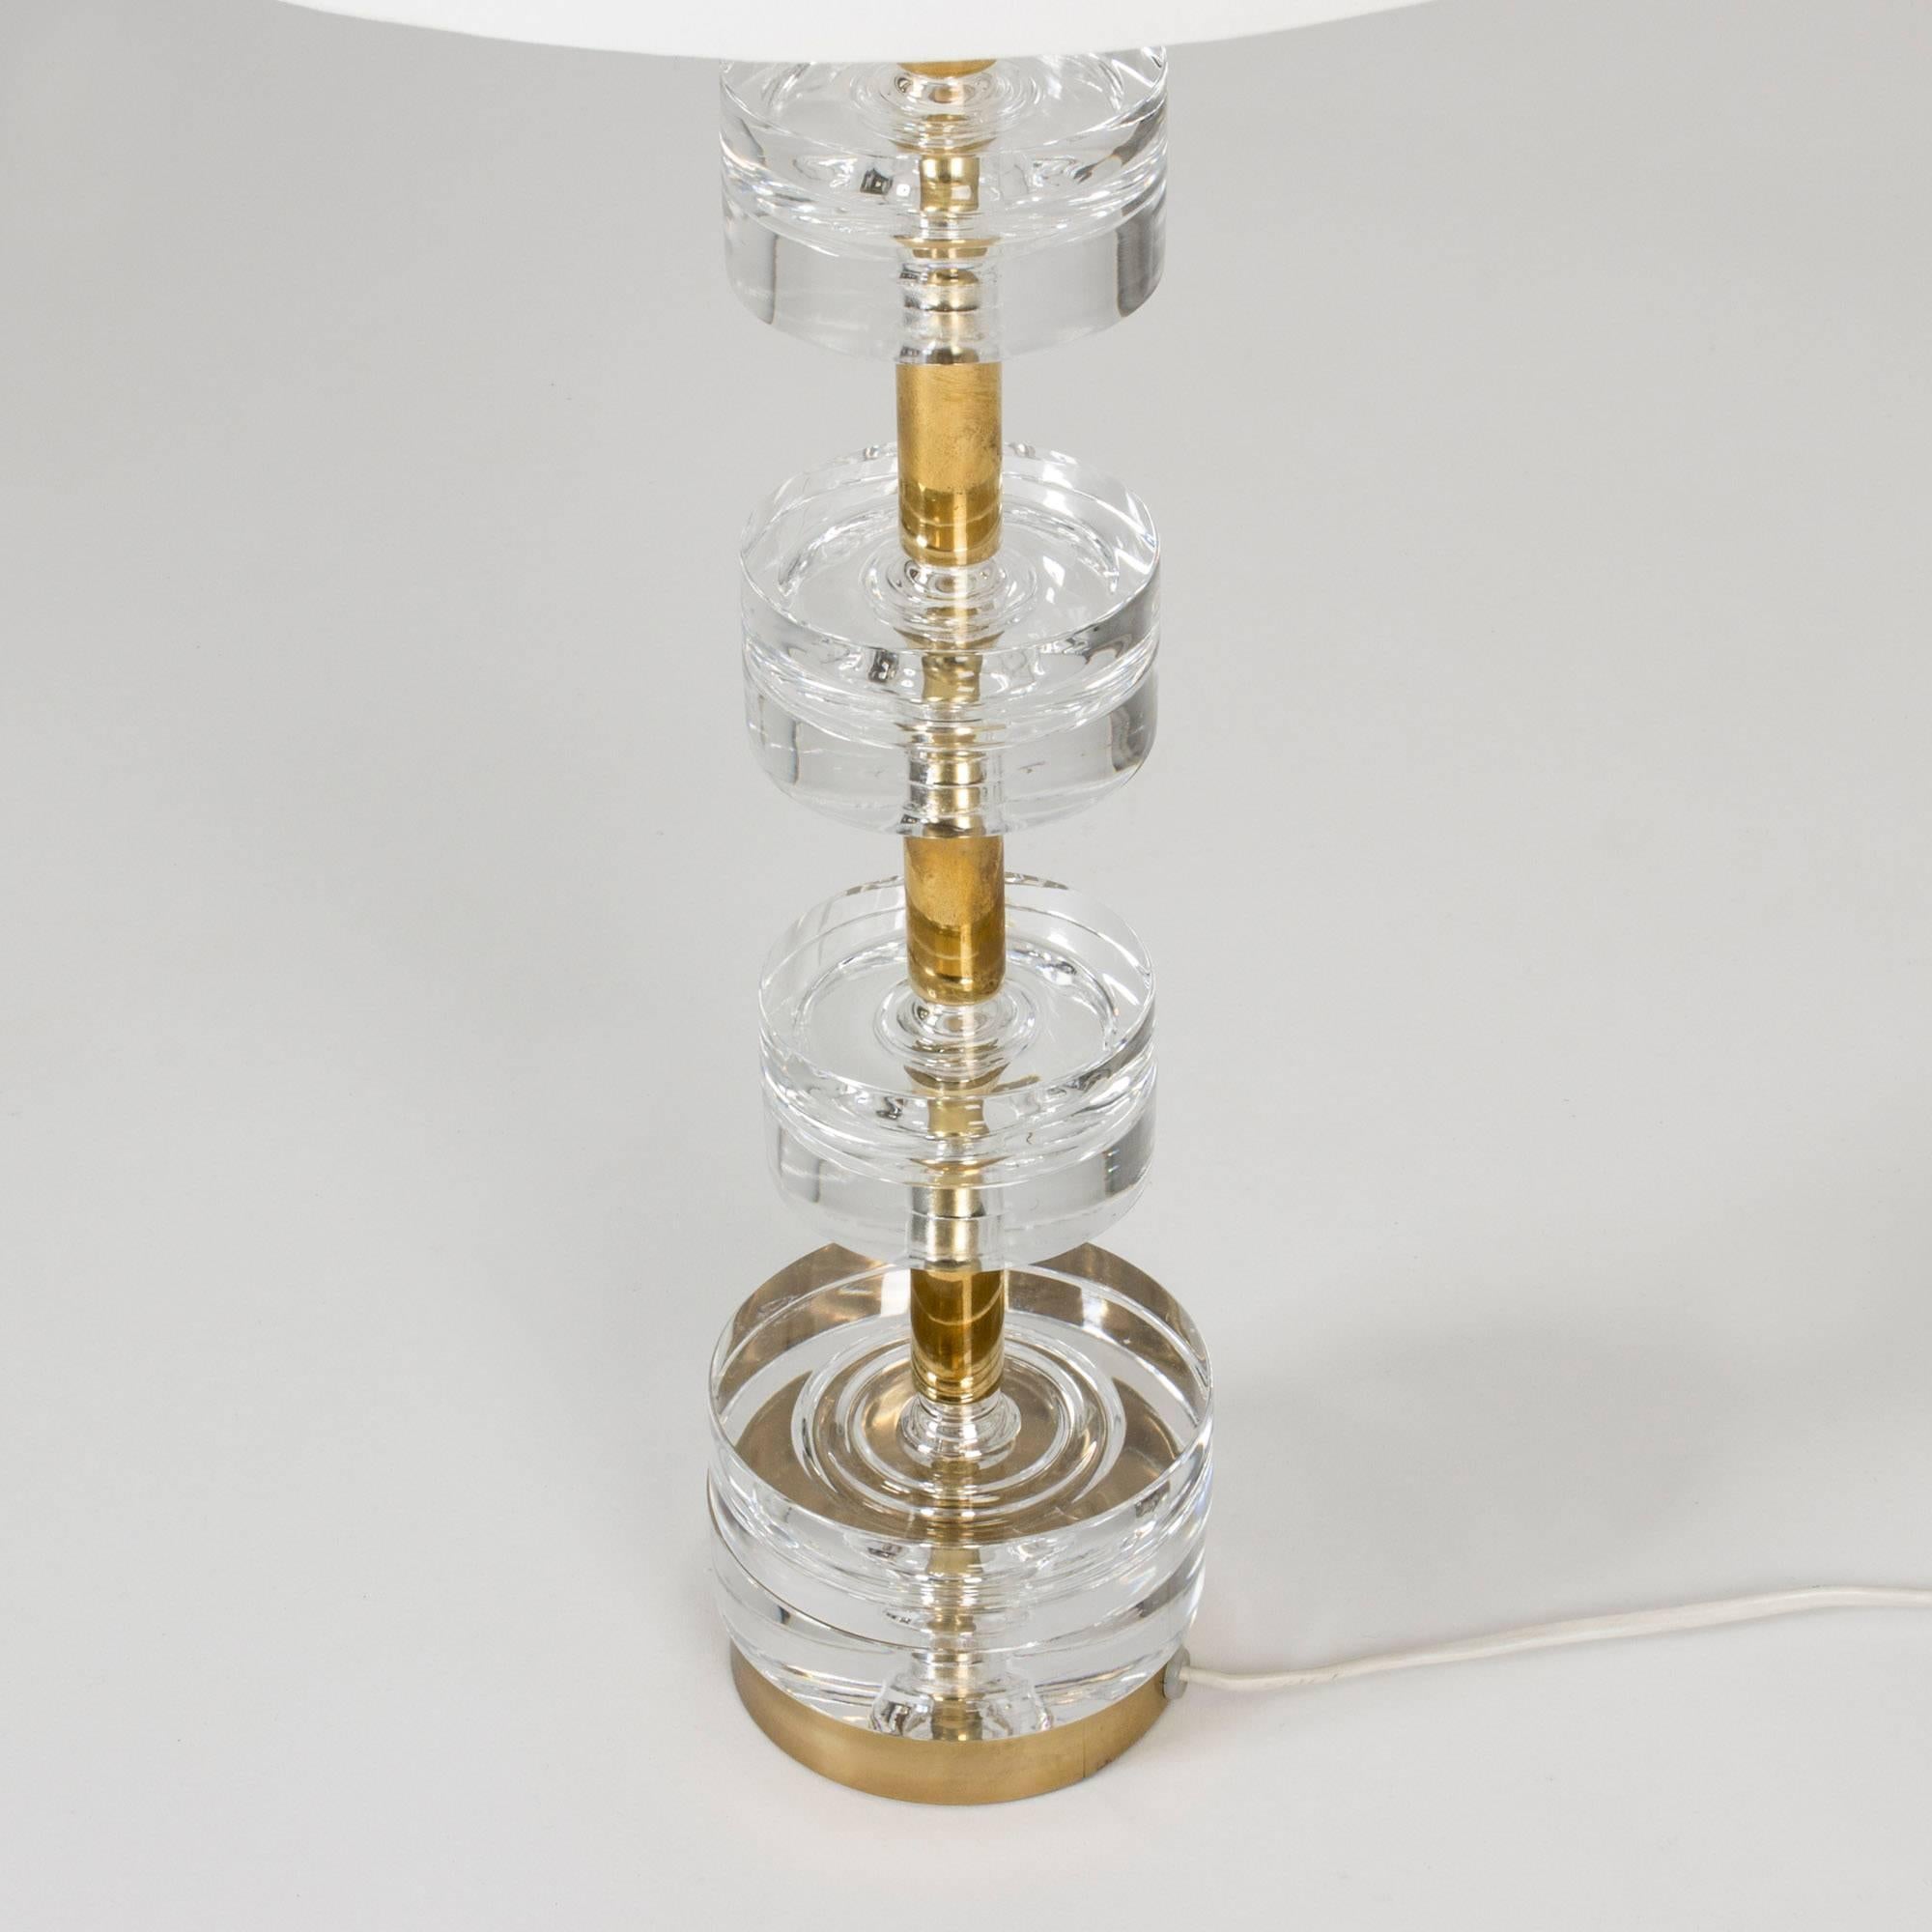 Delectably elegant brass and crystal table lamp by Carl Fagerlund. The base is made from four sets of thick, clear crystal discs around a brass centre bar.